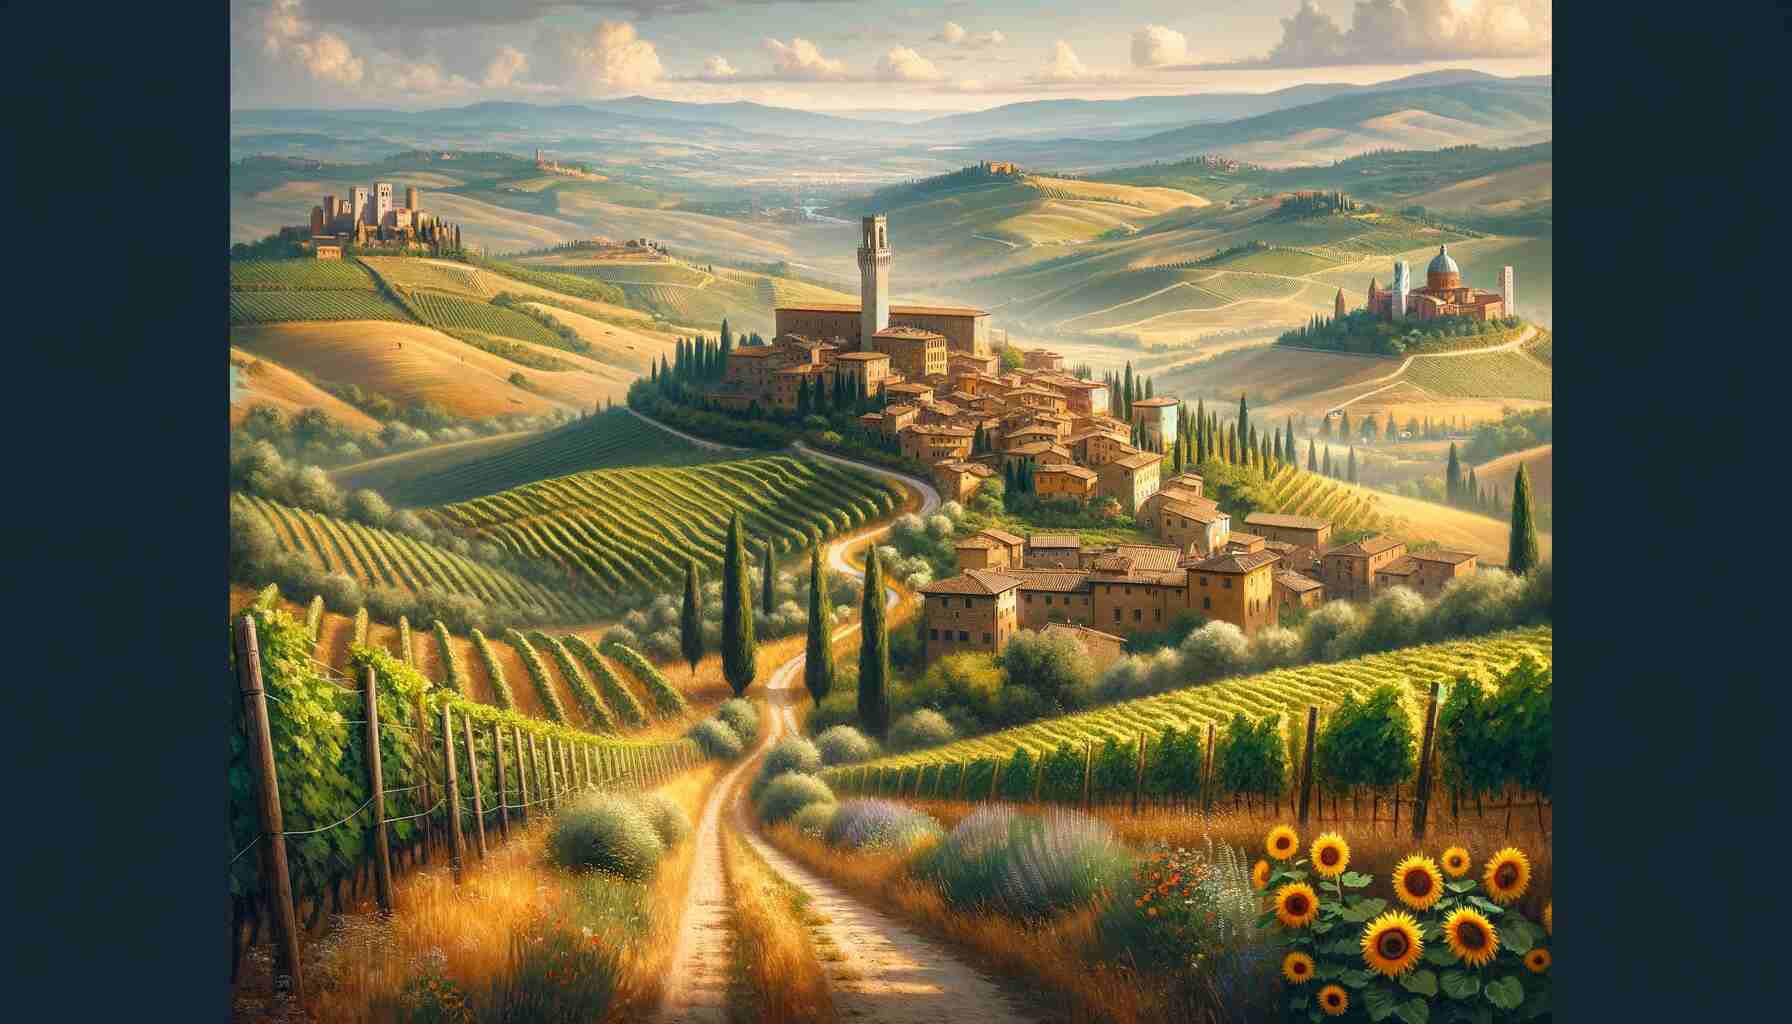 Here is the visual image of the Via Francigena trail in Tuscany, Italy, capturing the charming Tuscan landscape with its rolling hills, picturesque towns, and the inviting trail.